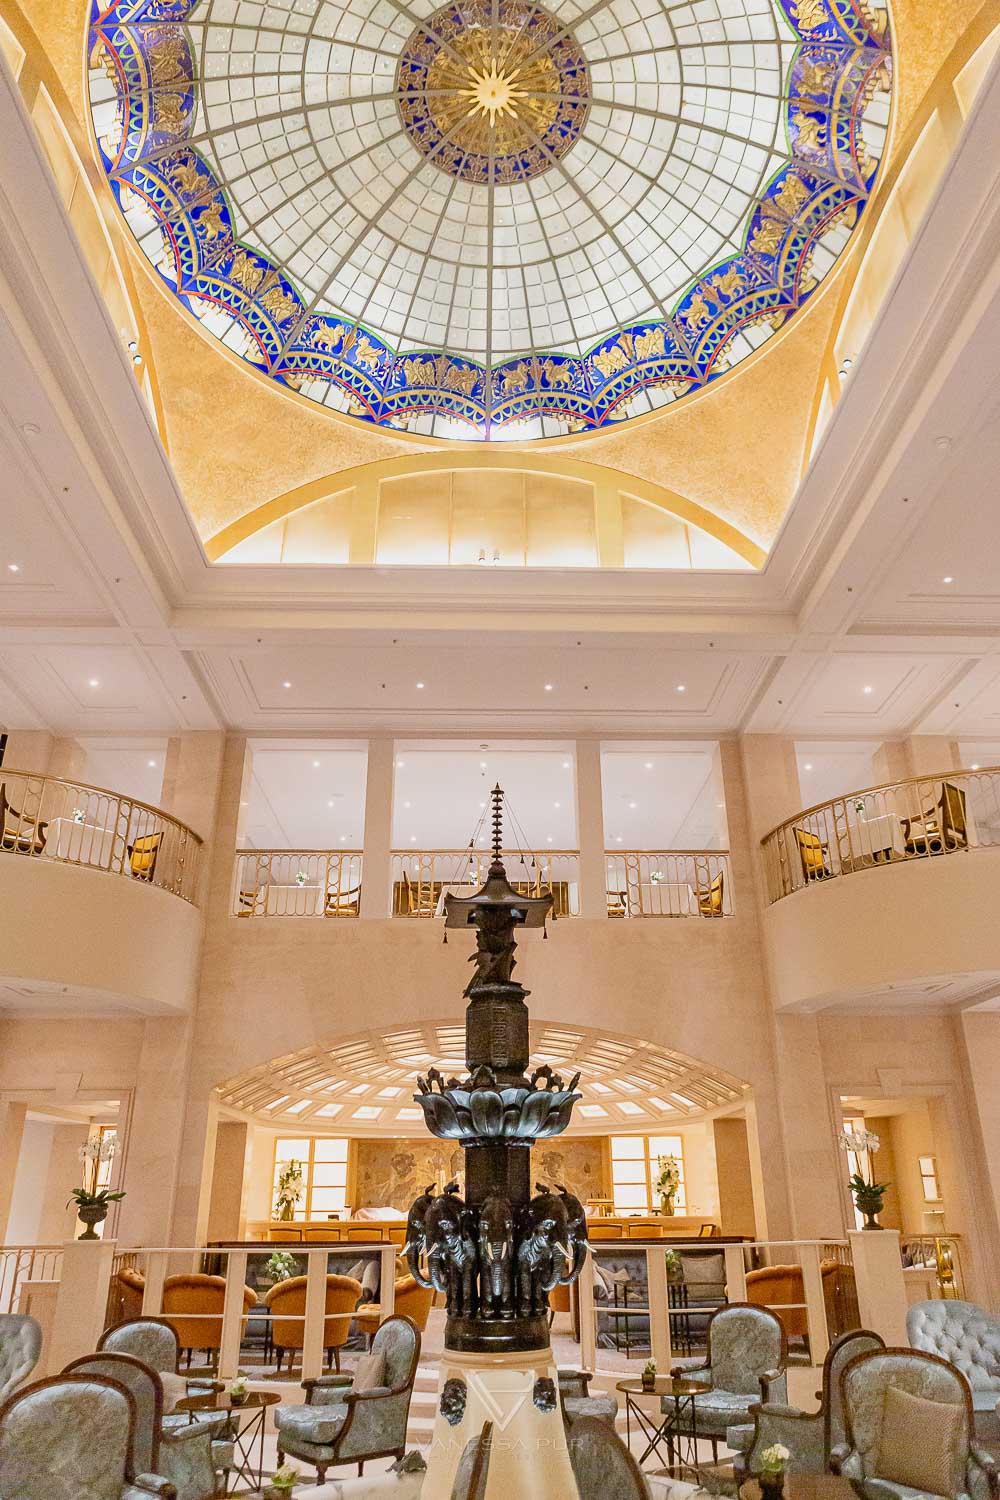 Kempinski Adlon Hotel Berlin - impression and stay - Adlon Hotel Berlin - Luxury Hotel at the Brandenburg Gate - Presidential Suite - Suites with fireplace, Lorenz Adlon dining room, view